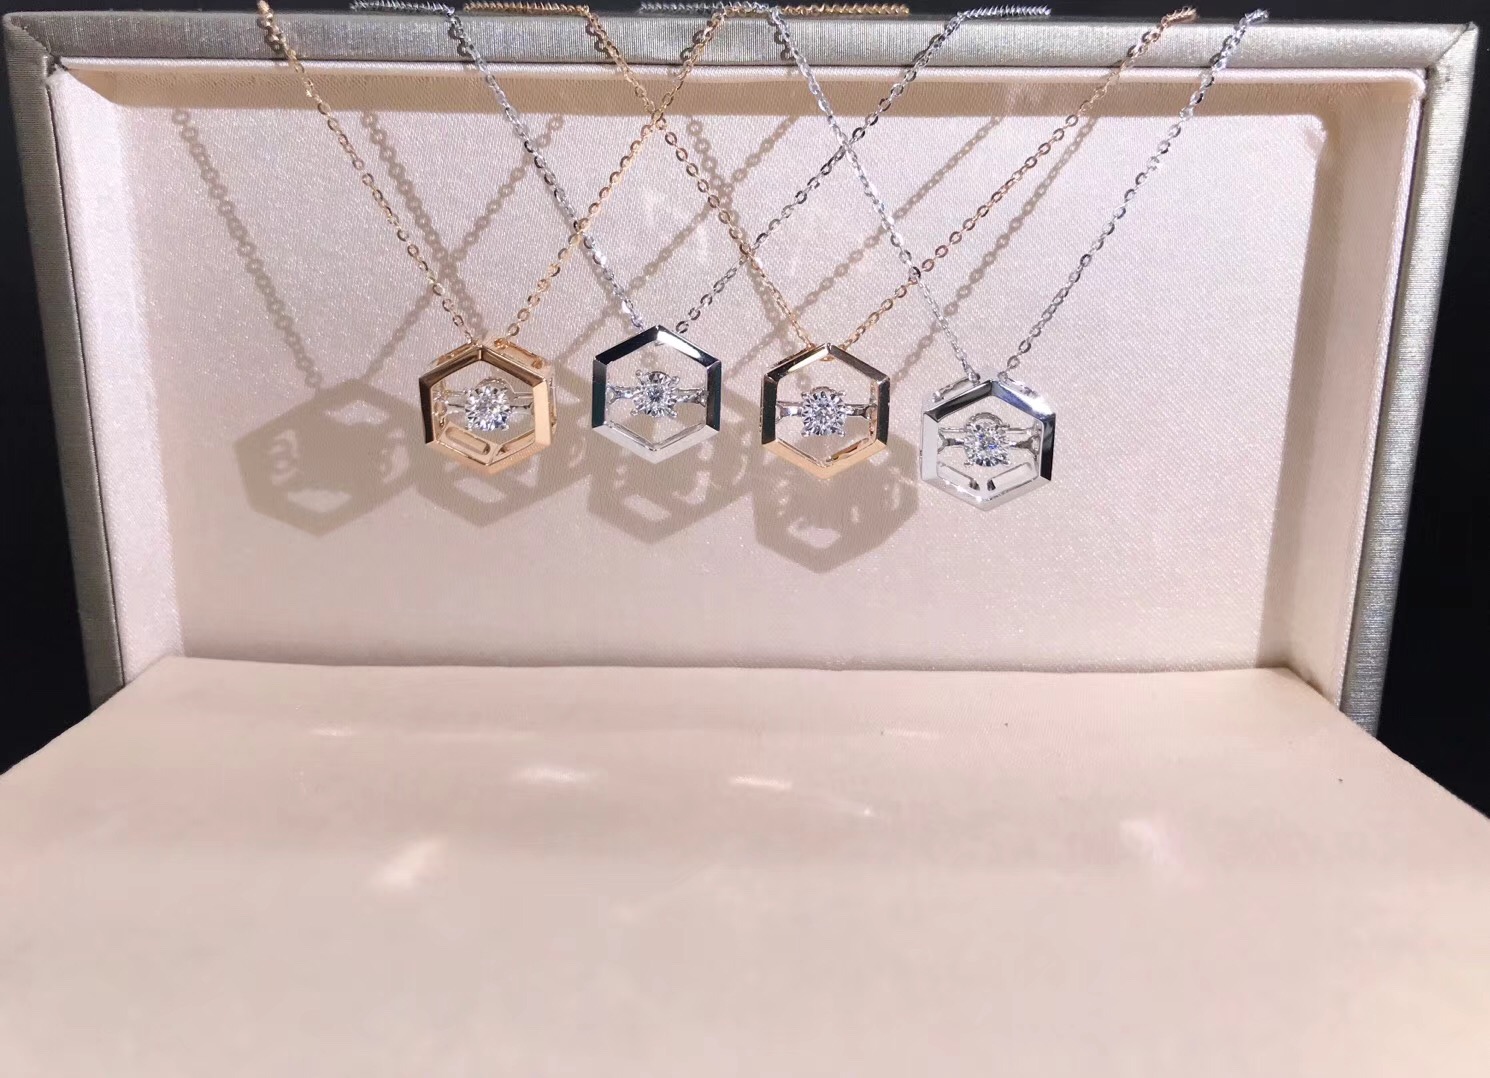 A00012 Hexagon Diamond Necklace in White Gold/Rose Gold